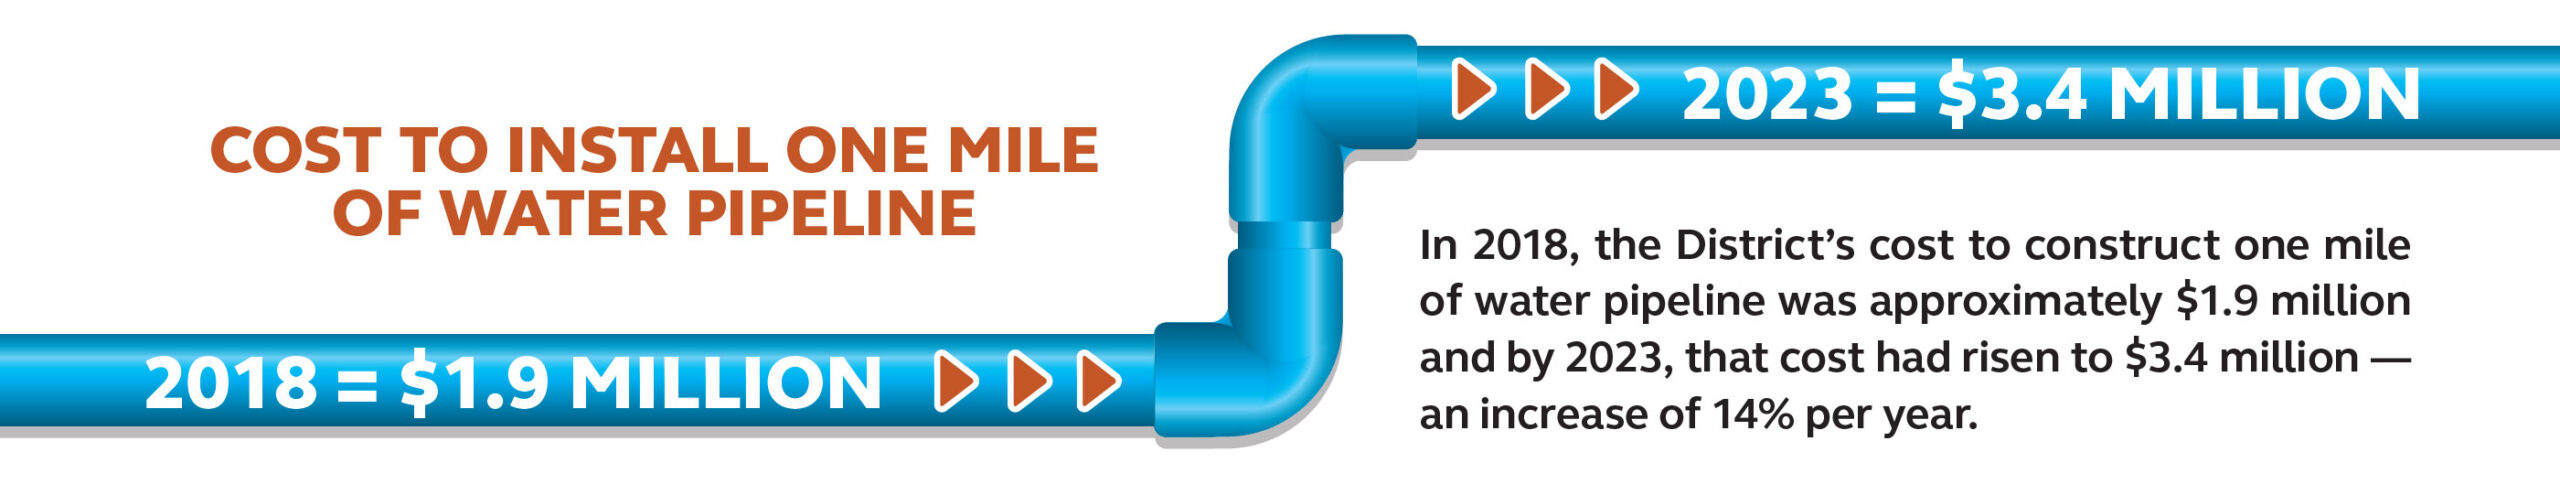 cost per mile of water pipeline graphic